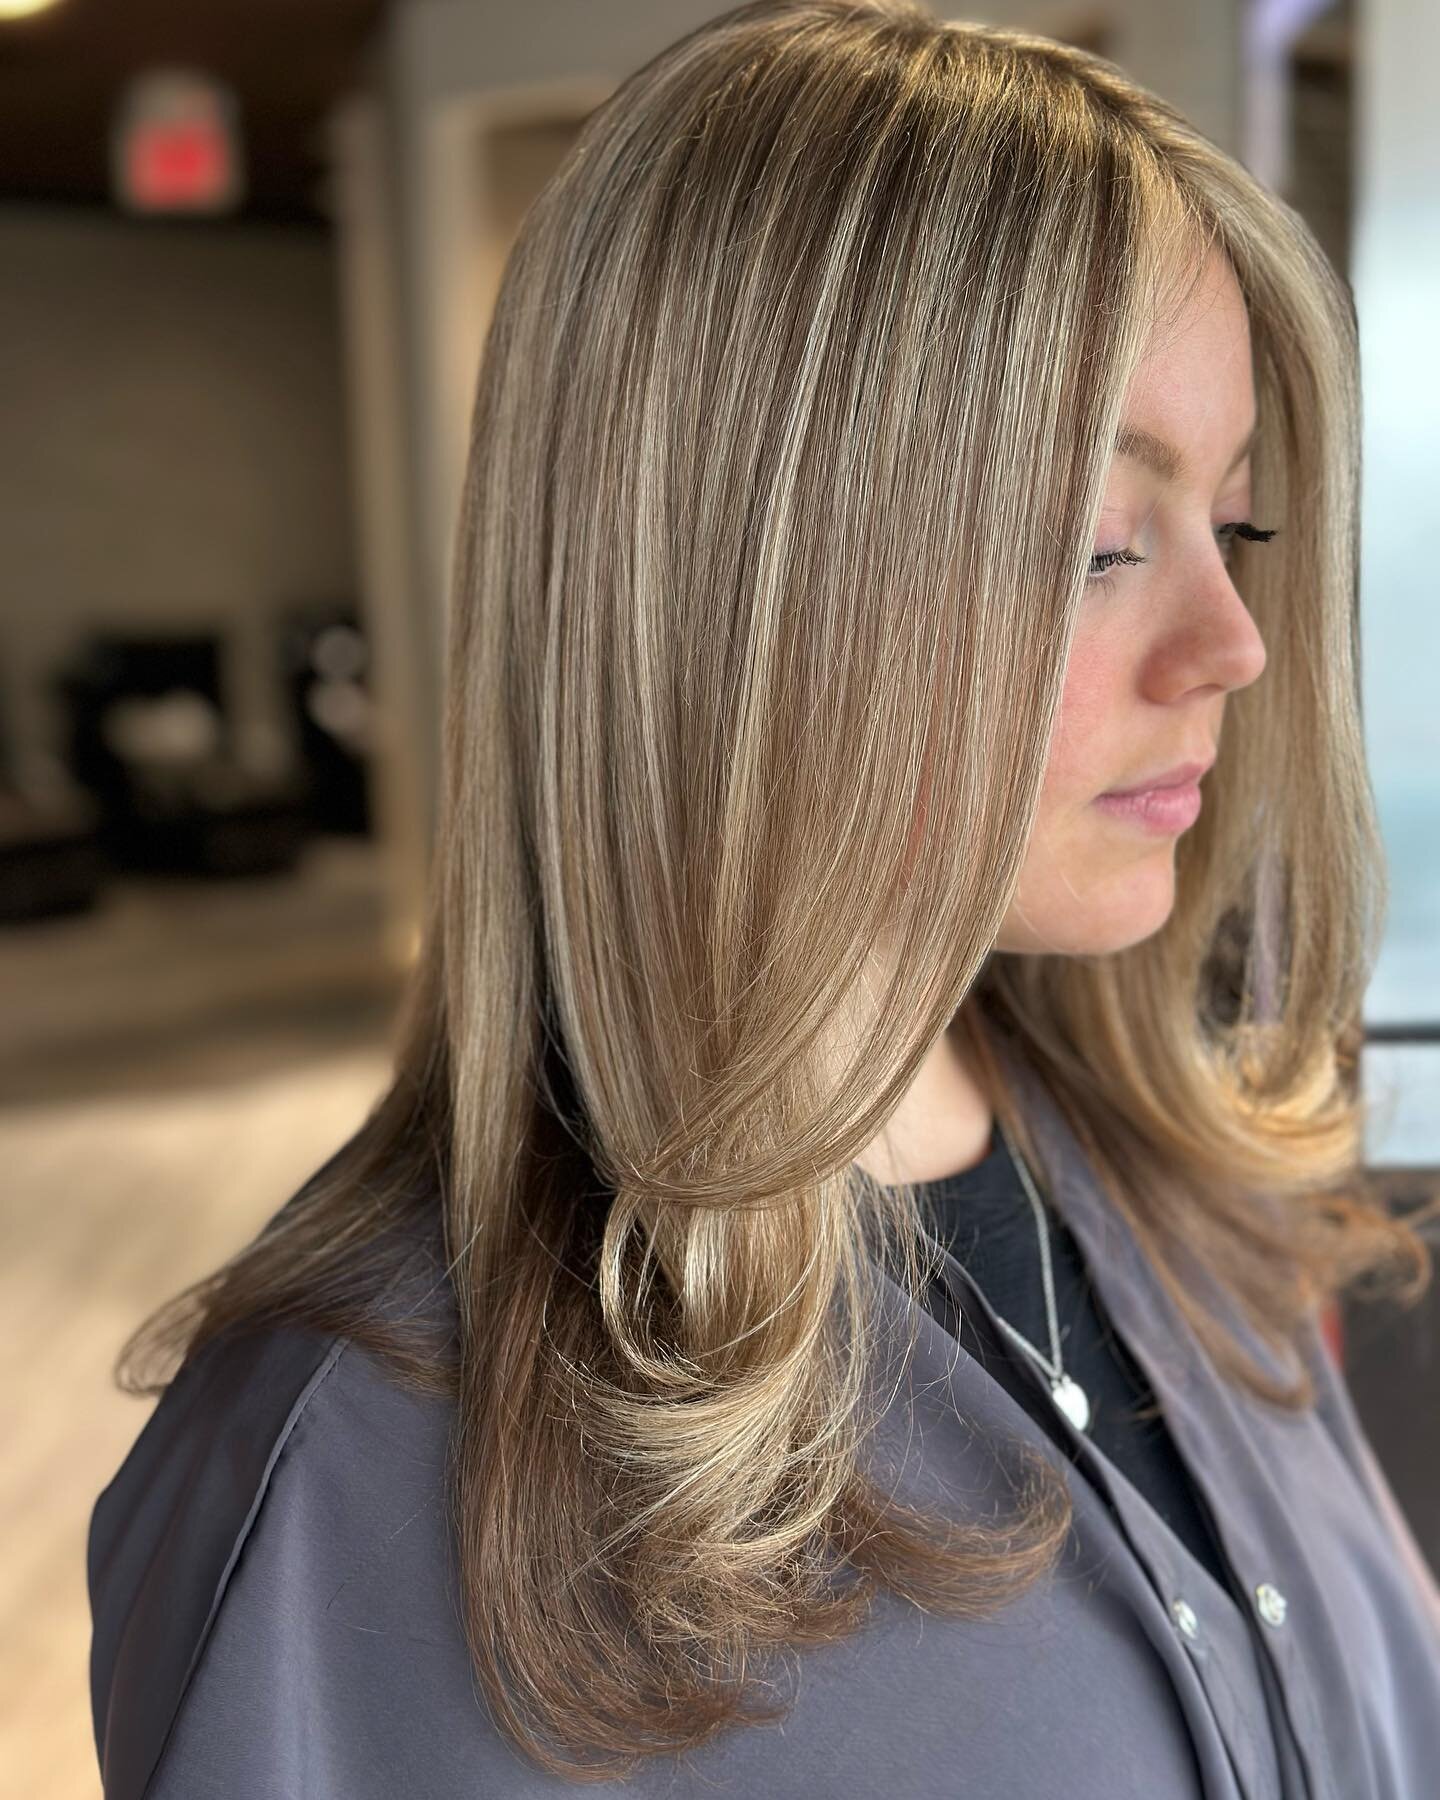 ✨new year, new hair✨ its time to write your new hair story!! 📖 

#skindeep #newhair #newyear #njsalon #newhairnewyou #newyearnewme #highlights #blonde #hairinspo #hairgoals